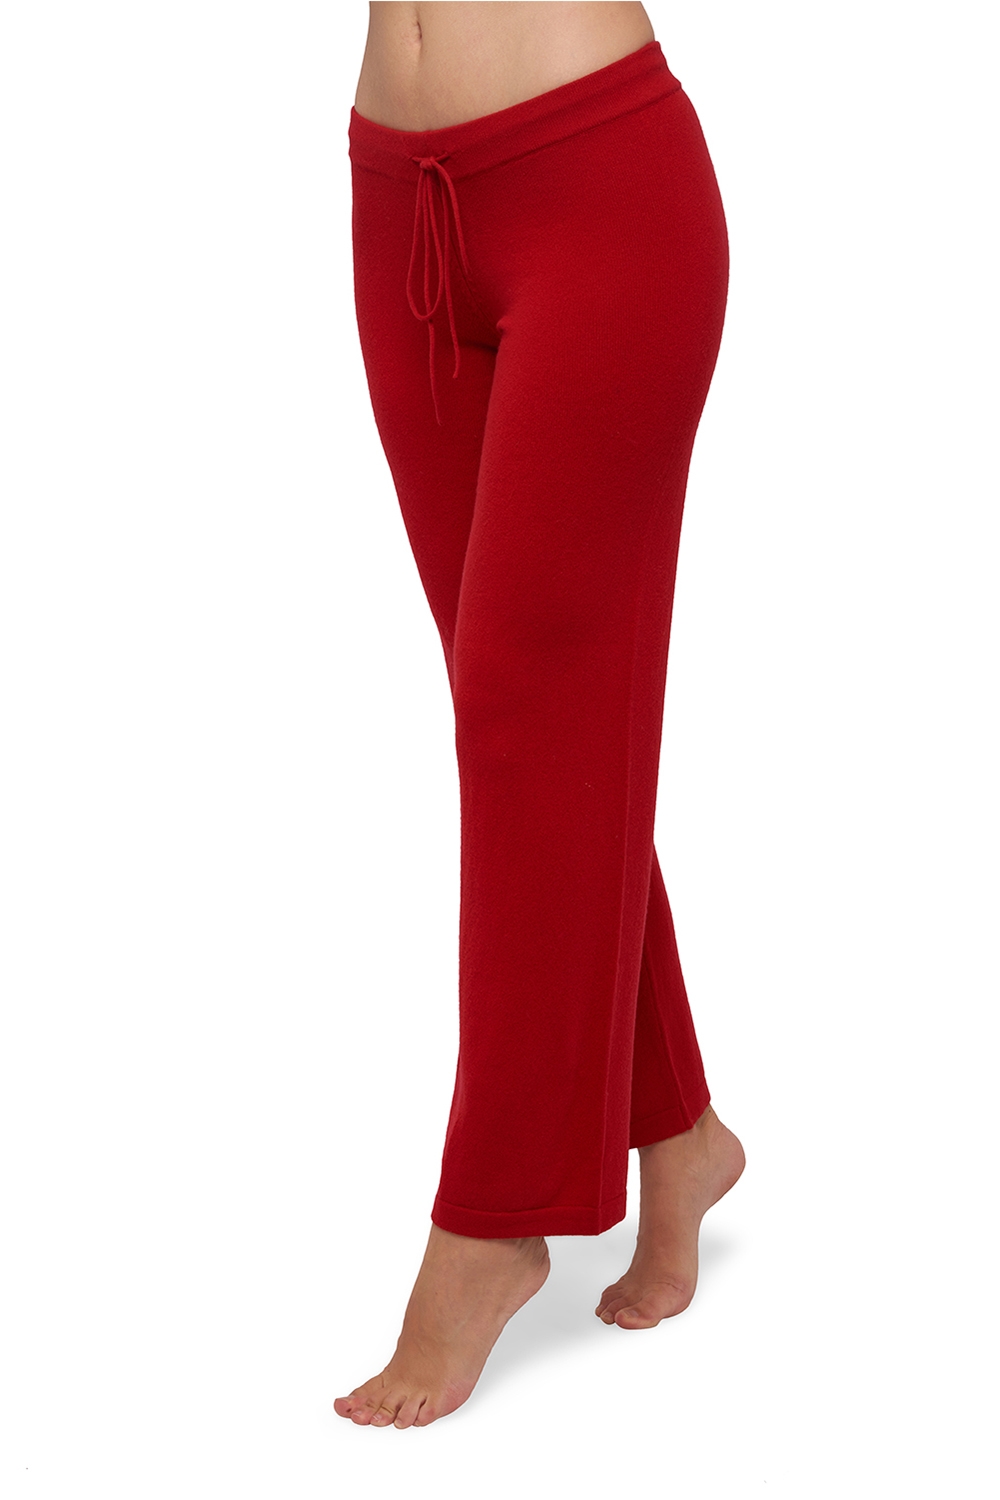 Cashmere ladies malice blood red xs